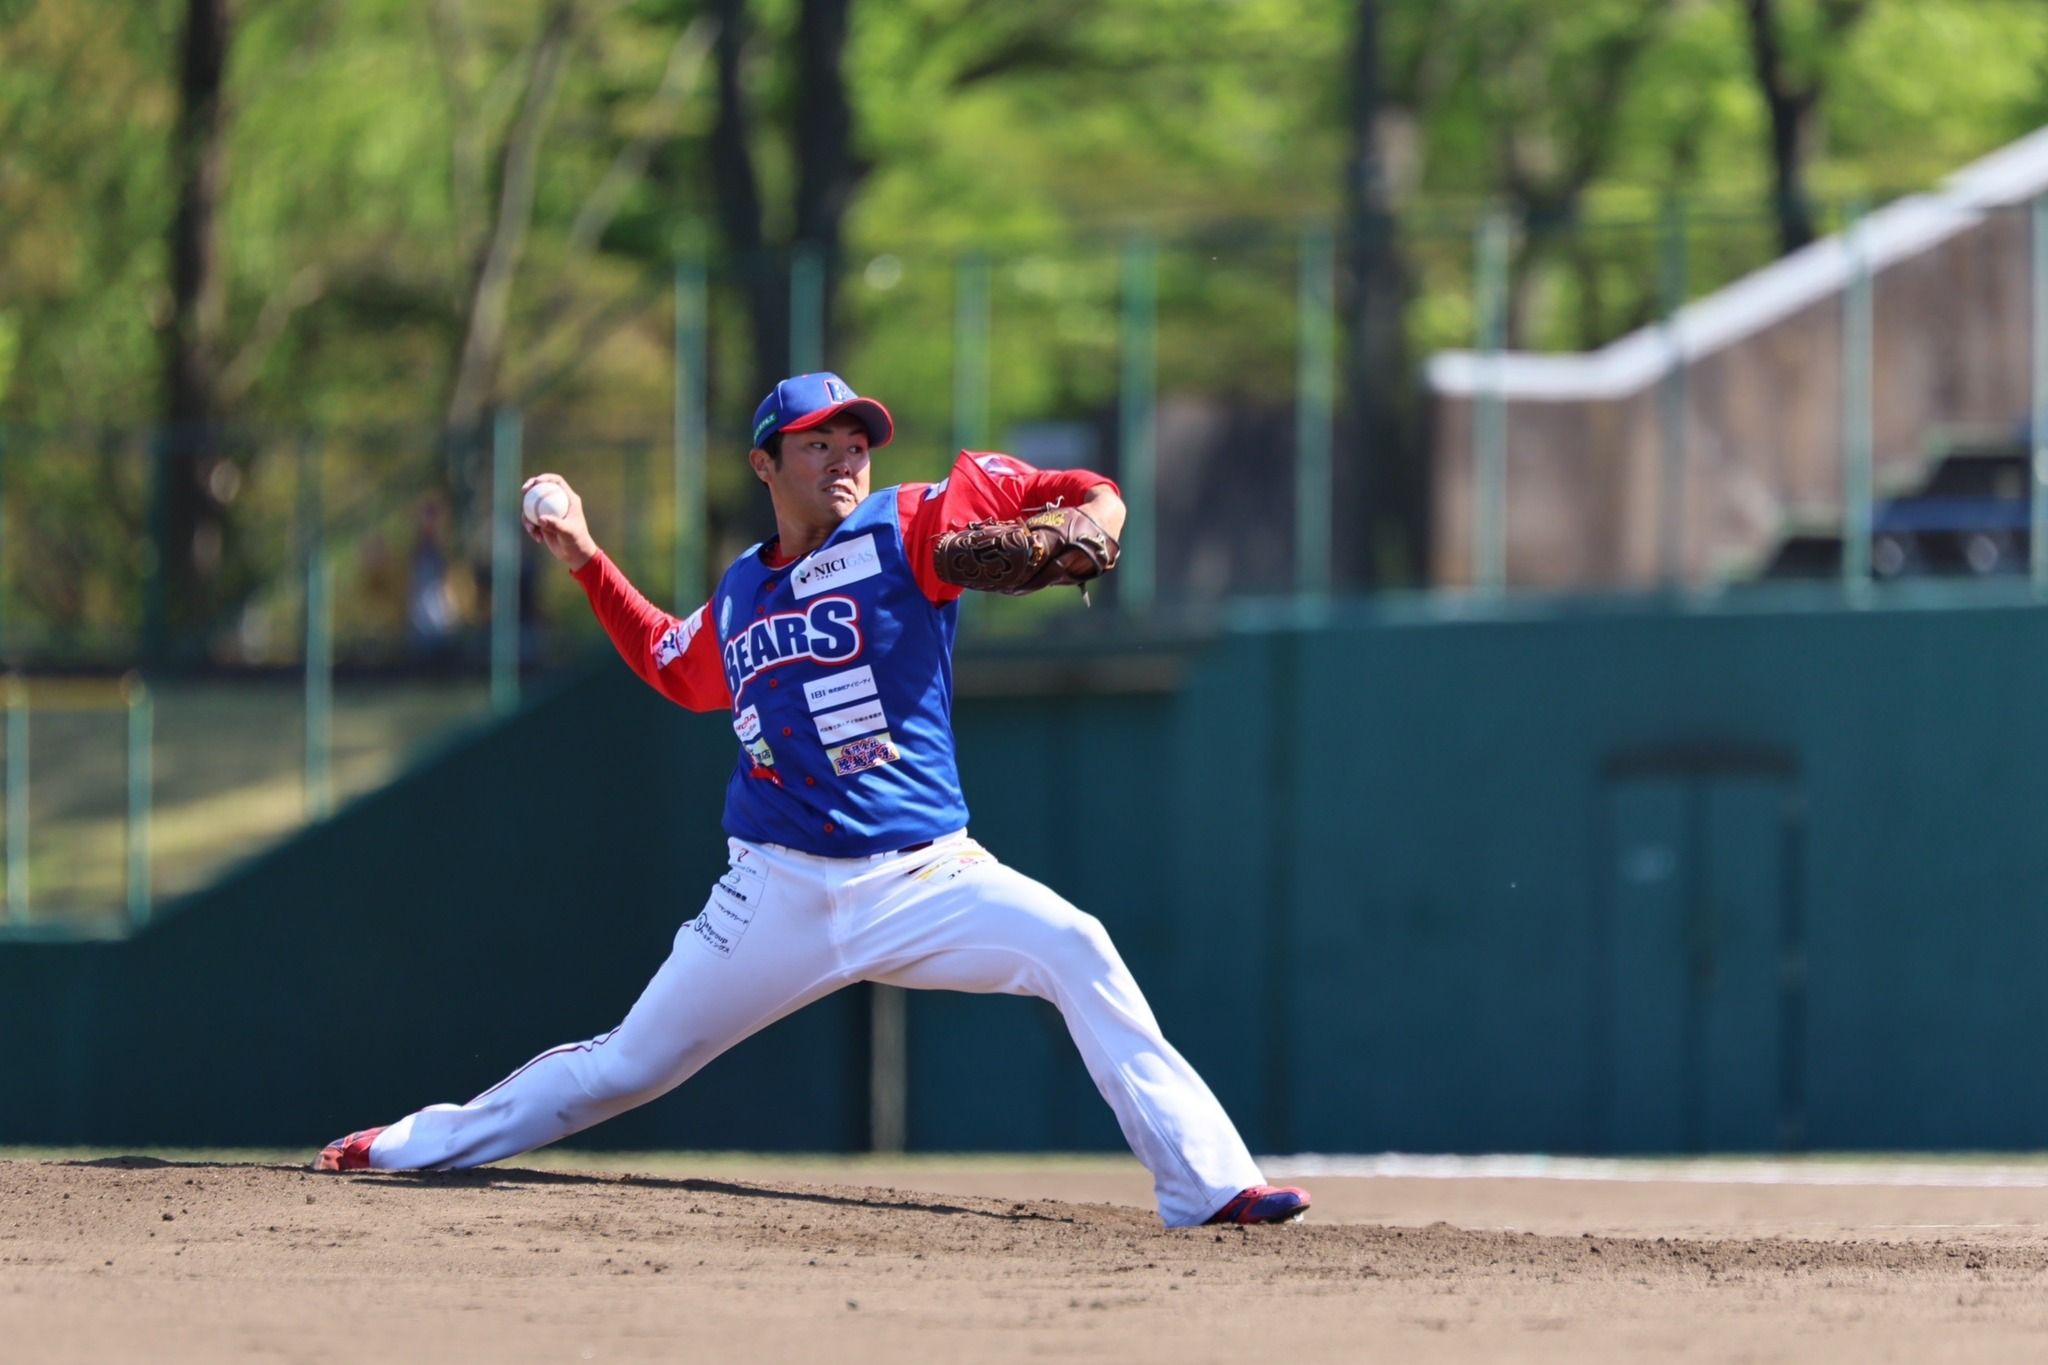 Rakuten Monkeys Secure Place in Taiwan Series With Playoff Triumph